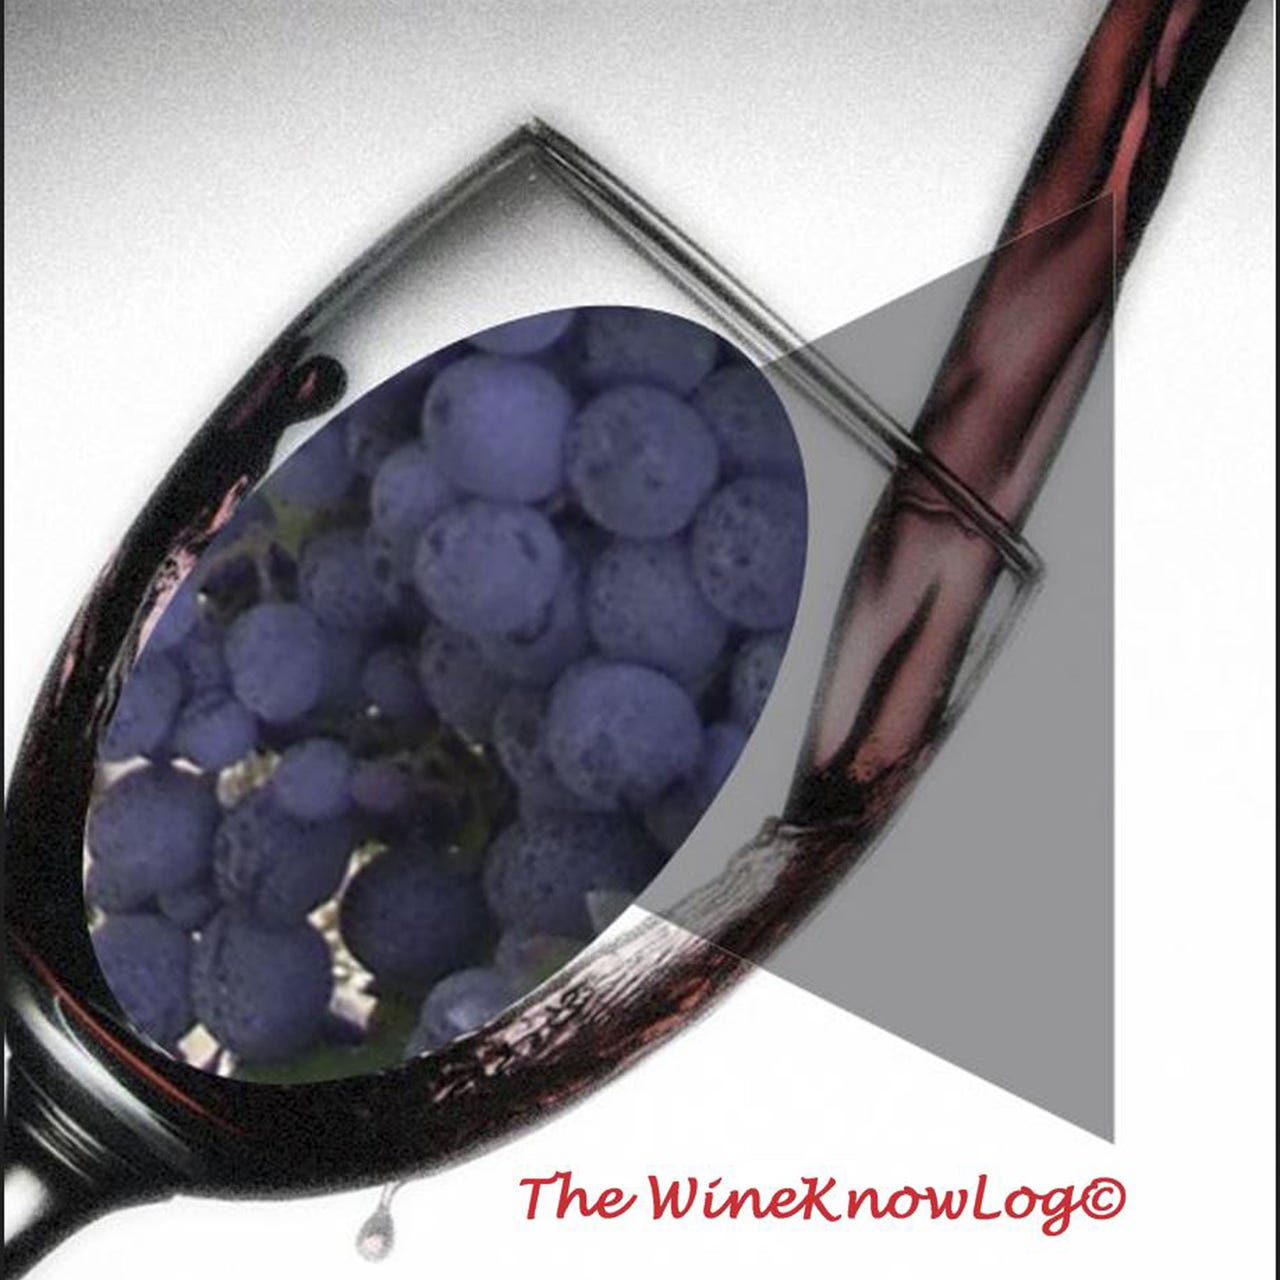 Artwork for The WineKnowLog©